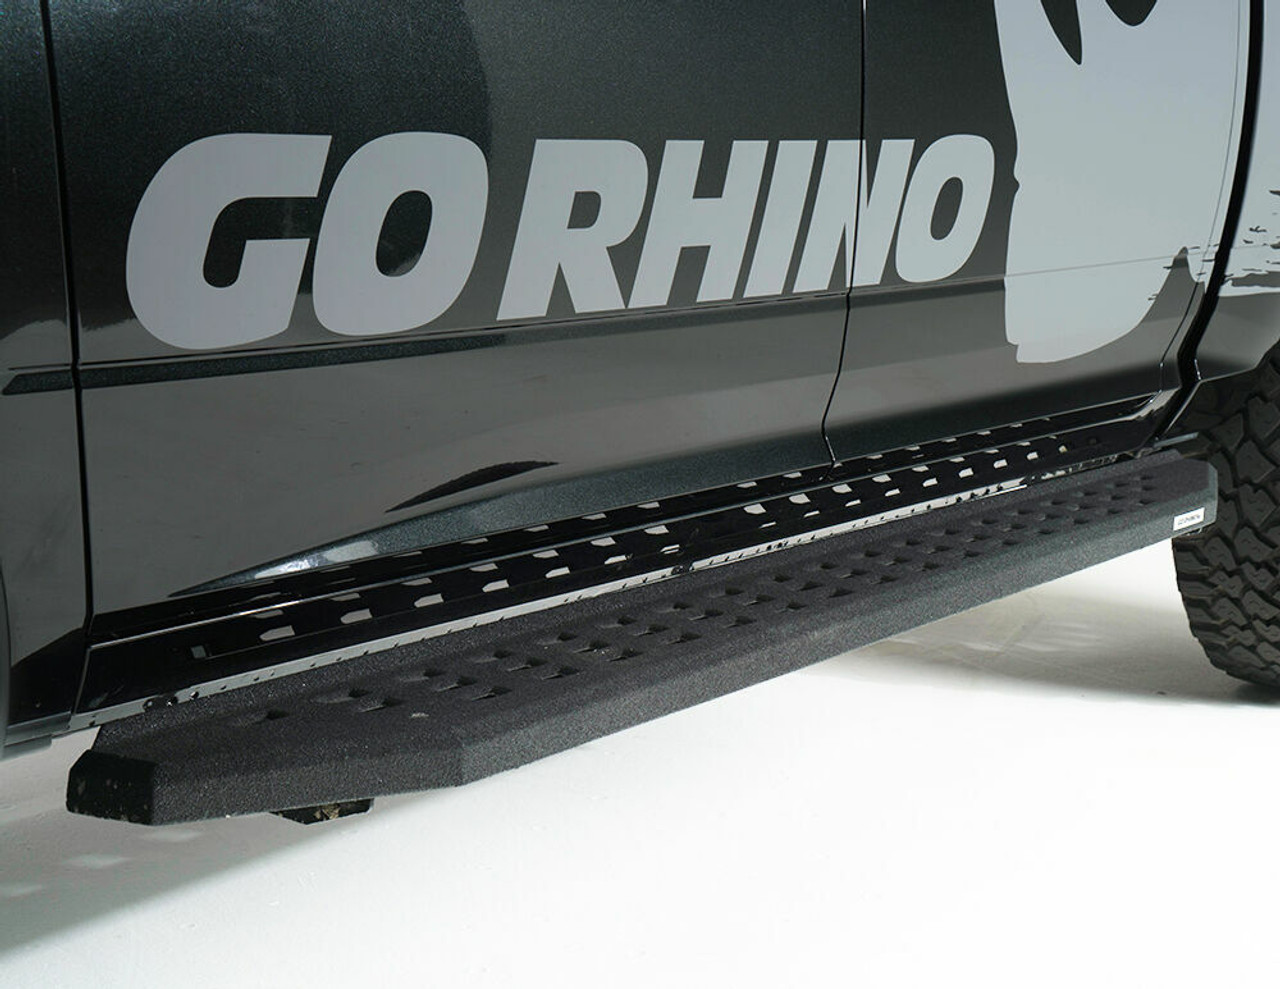 Go Rhino 6941068720T RAM 2500, 3500HD, 2010 - 2021, RB20 Running boards - Complete Kit:  2 pair RB20 Drop Steps, Galvanized Steel, Protective Bedliner coating, 69400087T RB20 + 6941065 RB Brackets + (2) 69420000T Drop Down Step